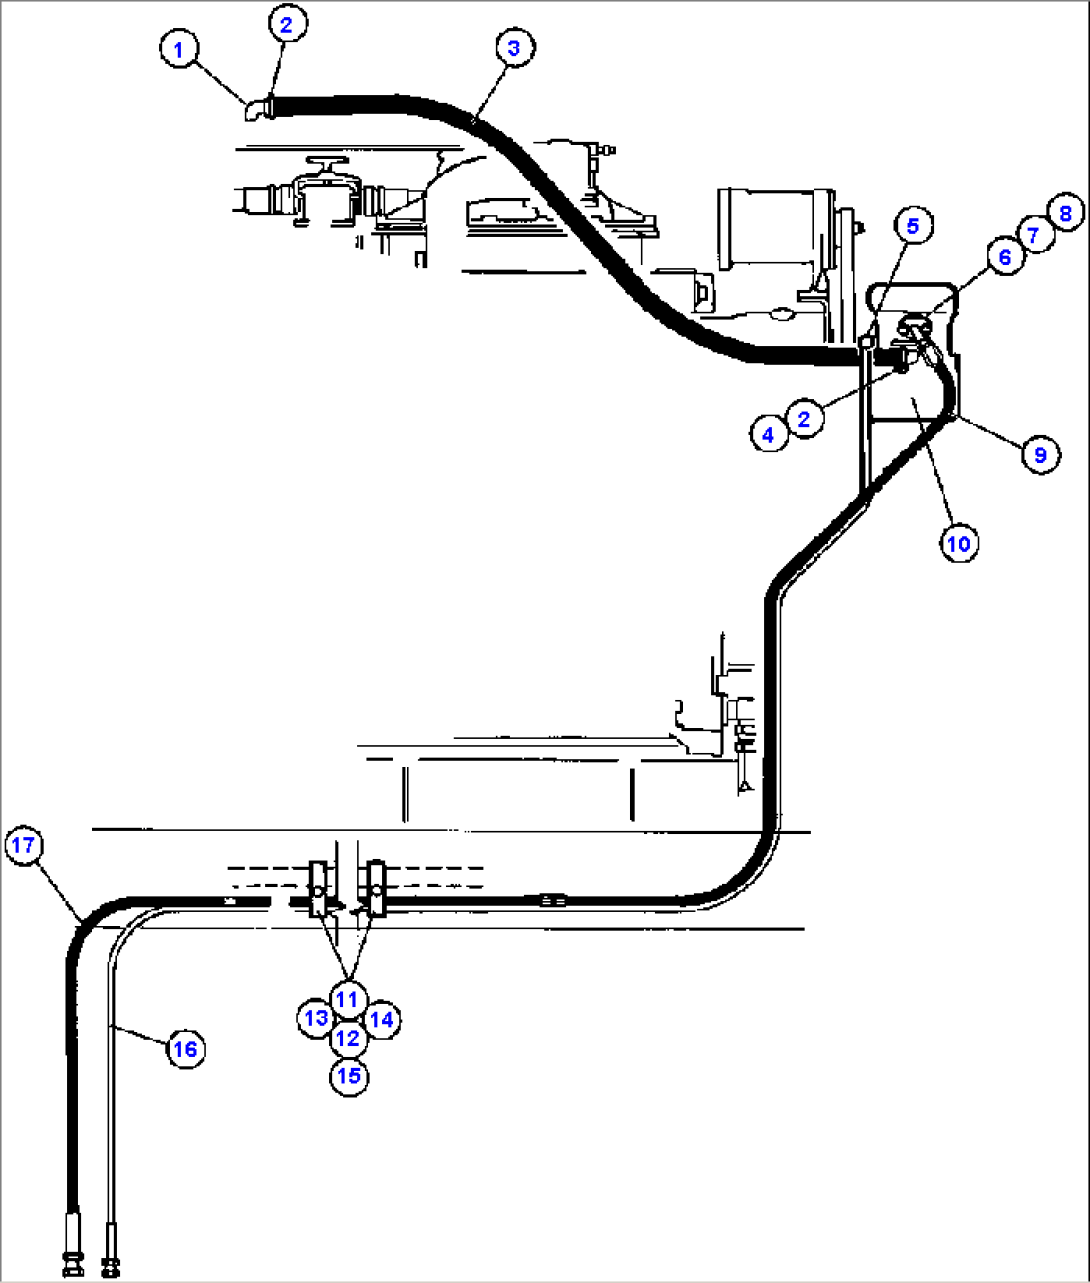 AIR COMPRESSOR PIPING